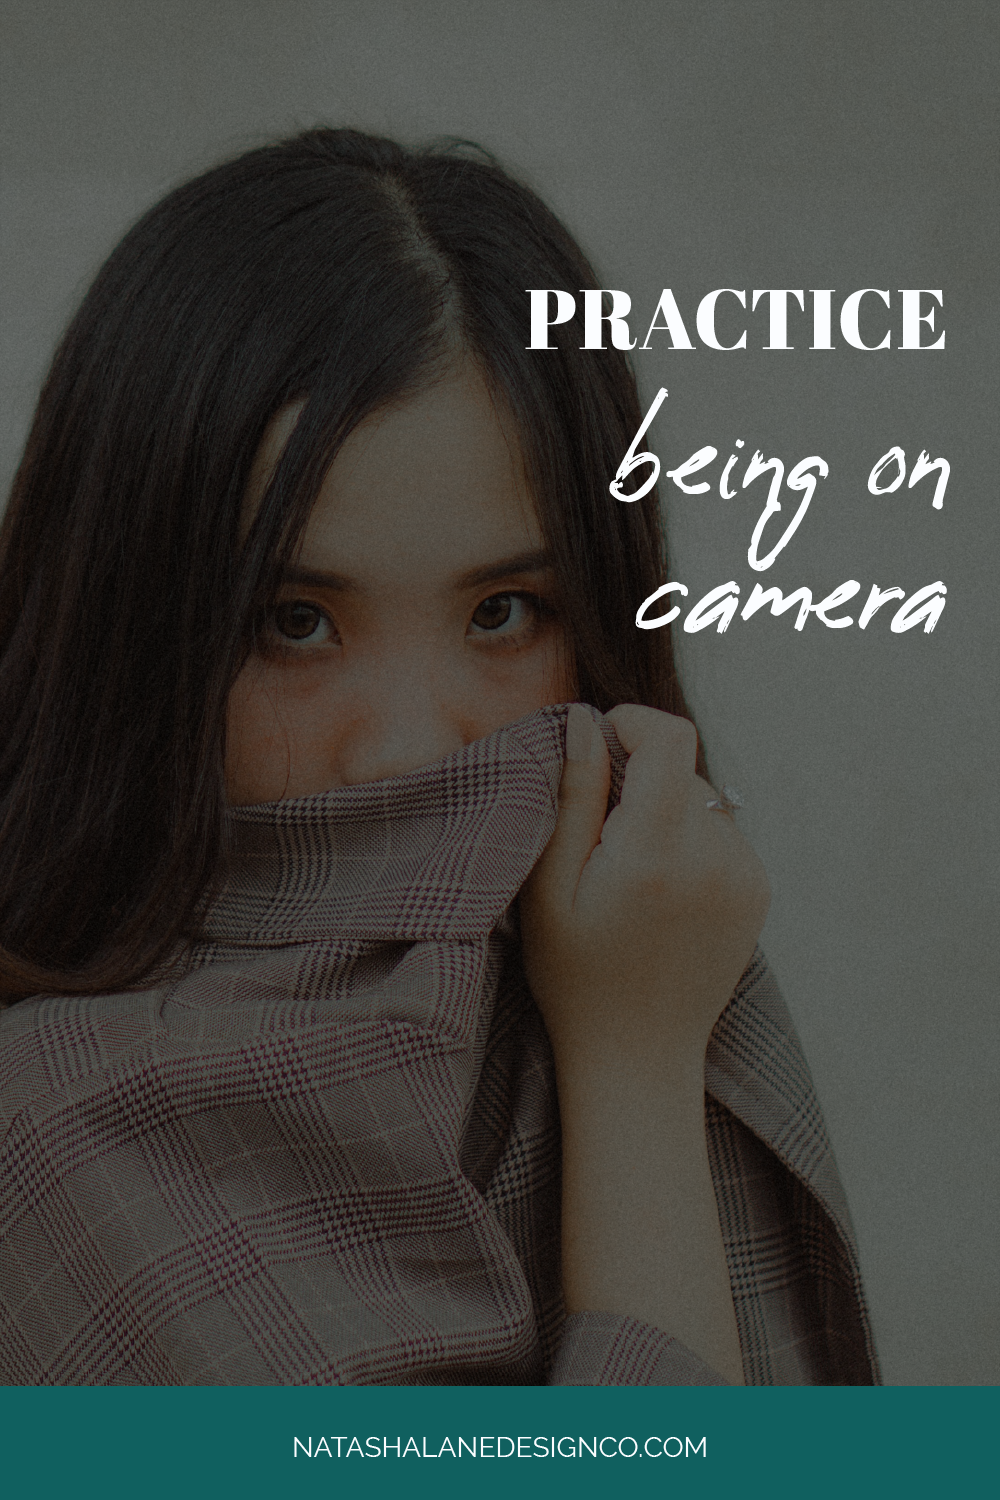 PRACTICE BEING ON CAMERA